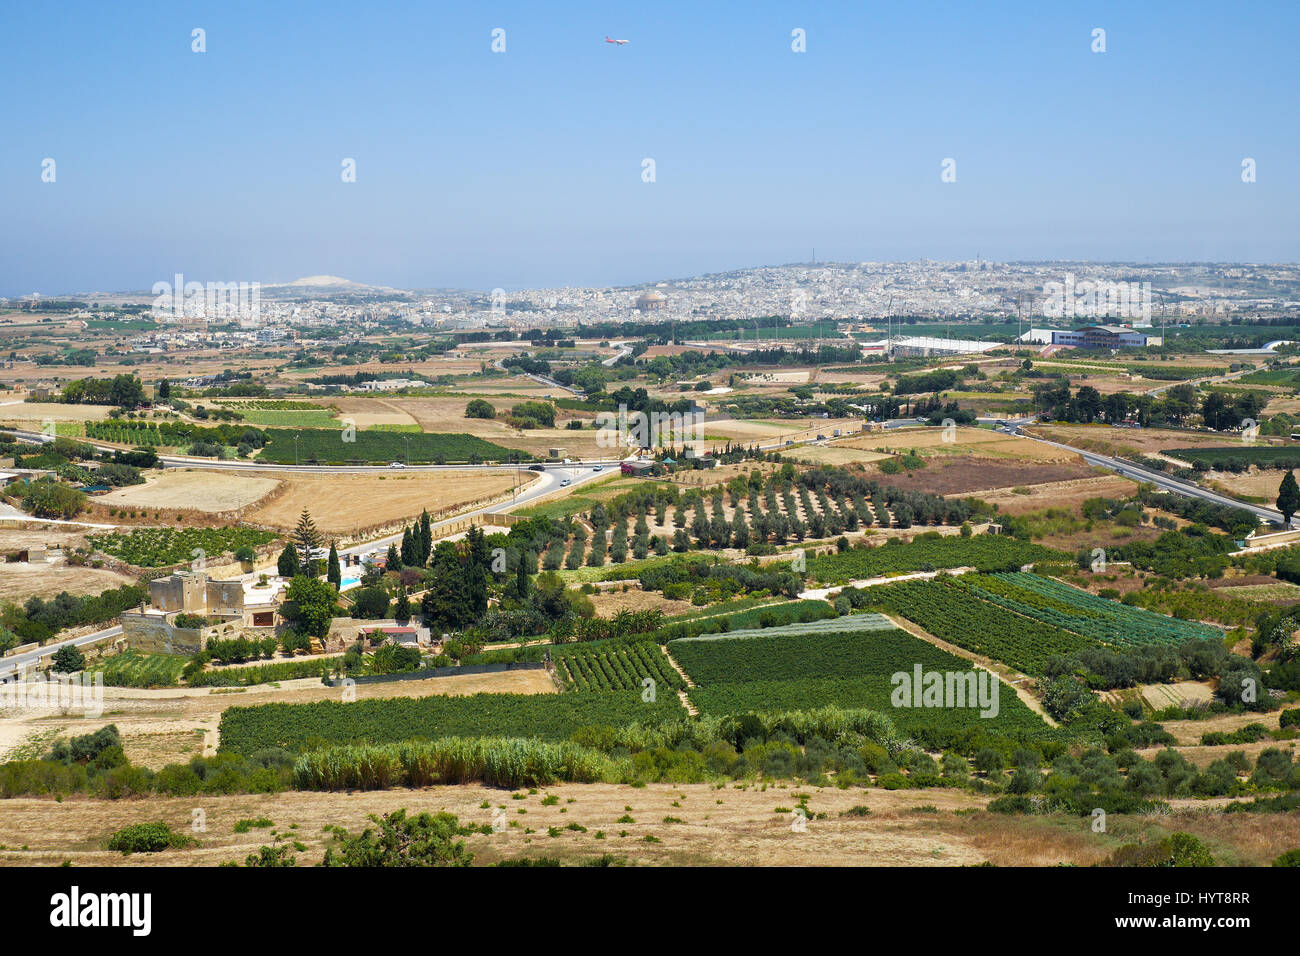 View from the Mdina defensive wall to the countryside with vineyards and gardens surrounding the old Malta capital and to the town Mosta with the huge Stock Photo